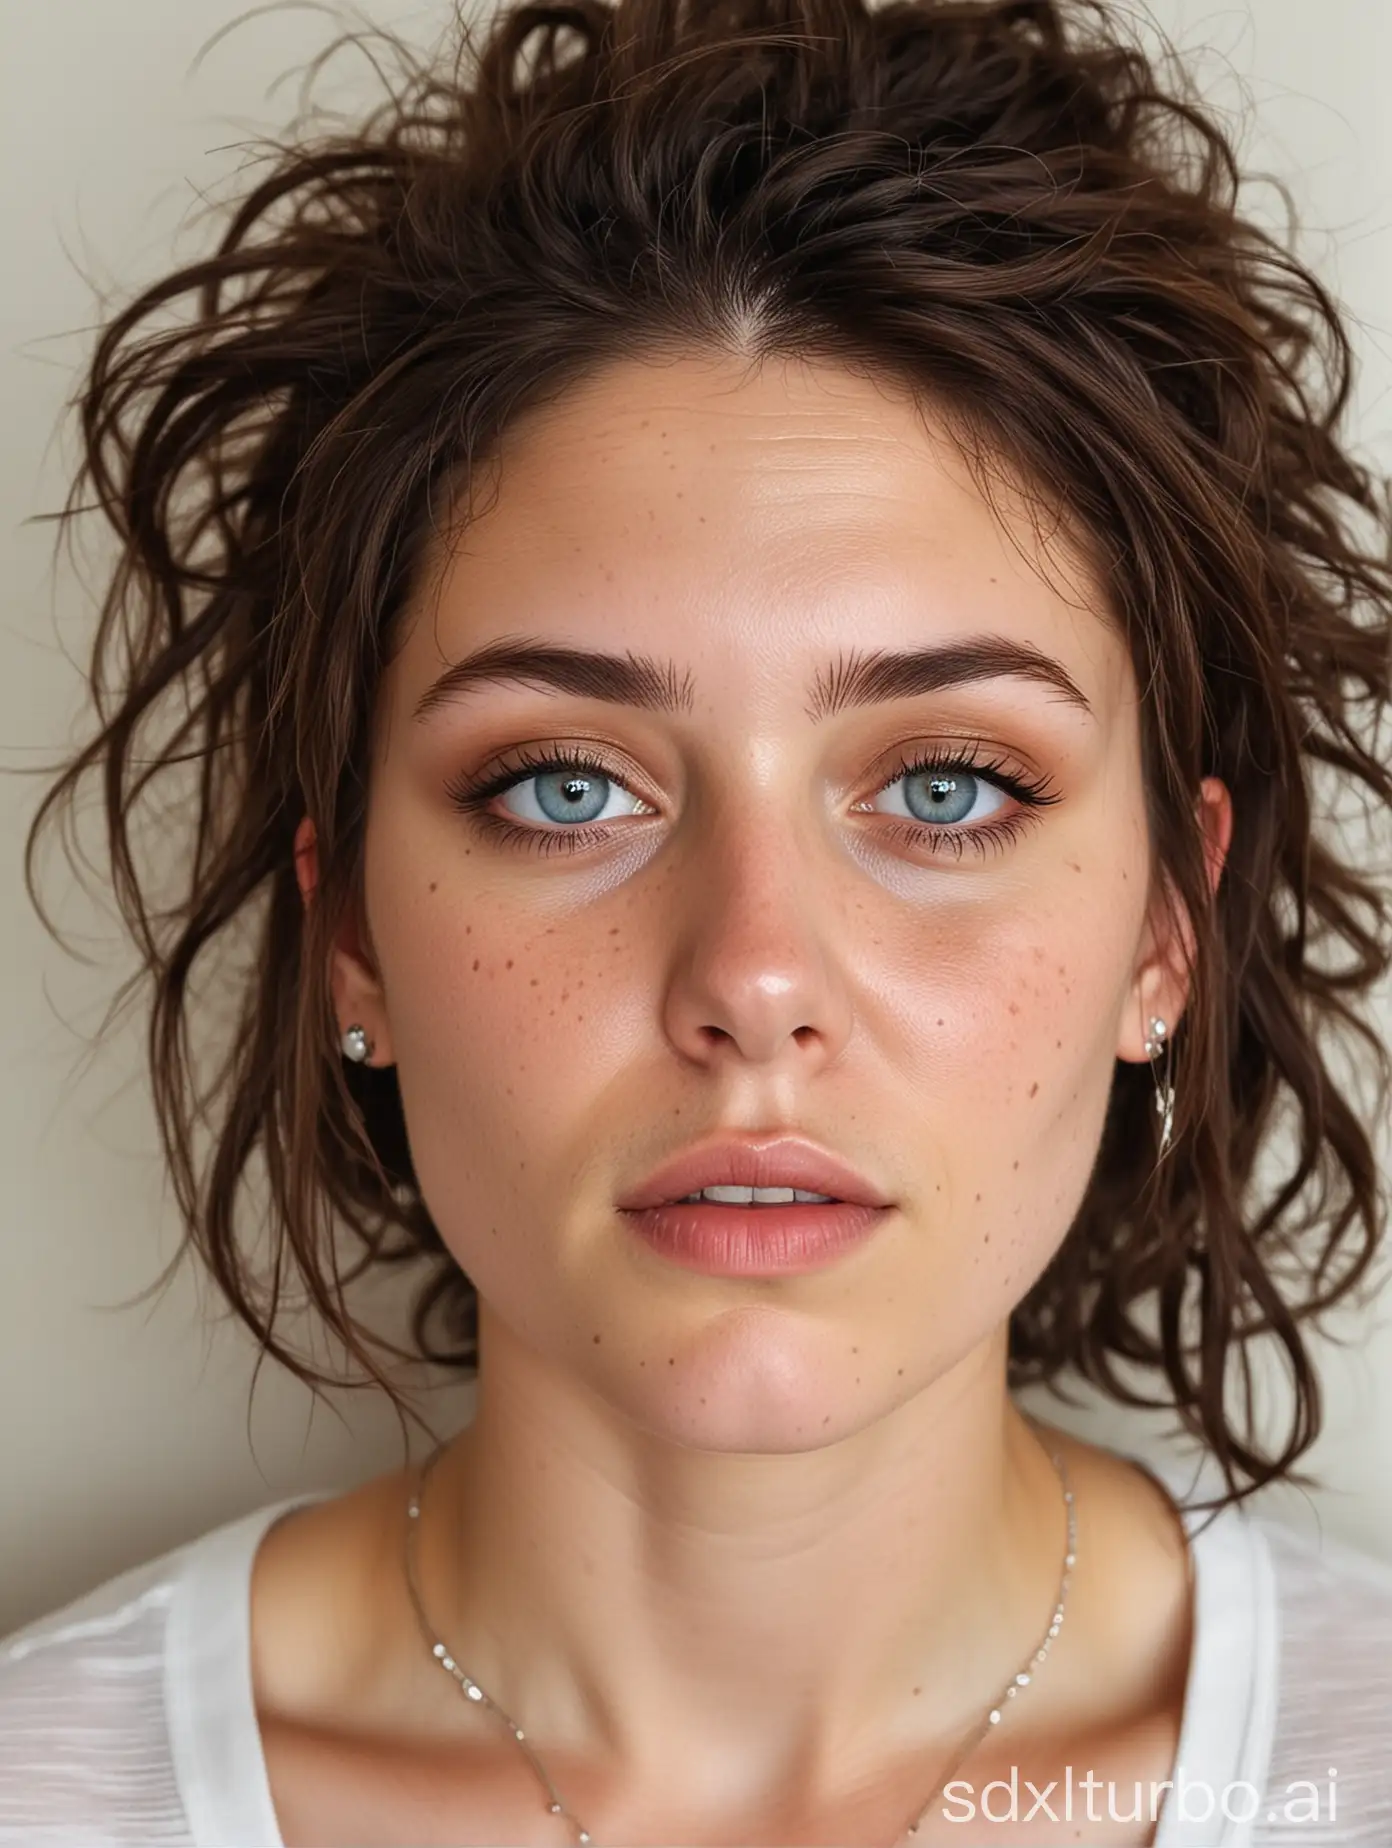 Woman, pale light skin tone, dark brown hair, brown really messy hair, brown rouge hairs, sleepy hair, bed hair, half undercut, shaven side of head, white streak in hair, a few brown dreadlocks with white string and beads on them, medium brown eyebrows, blue eyes, bags under eyes, tired eyes, loads of freckles, no make-up, thin-lips, skinny thin face